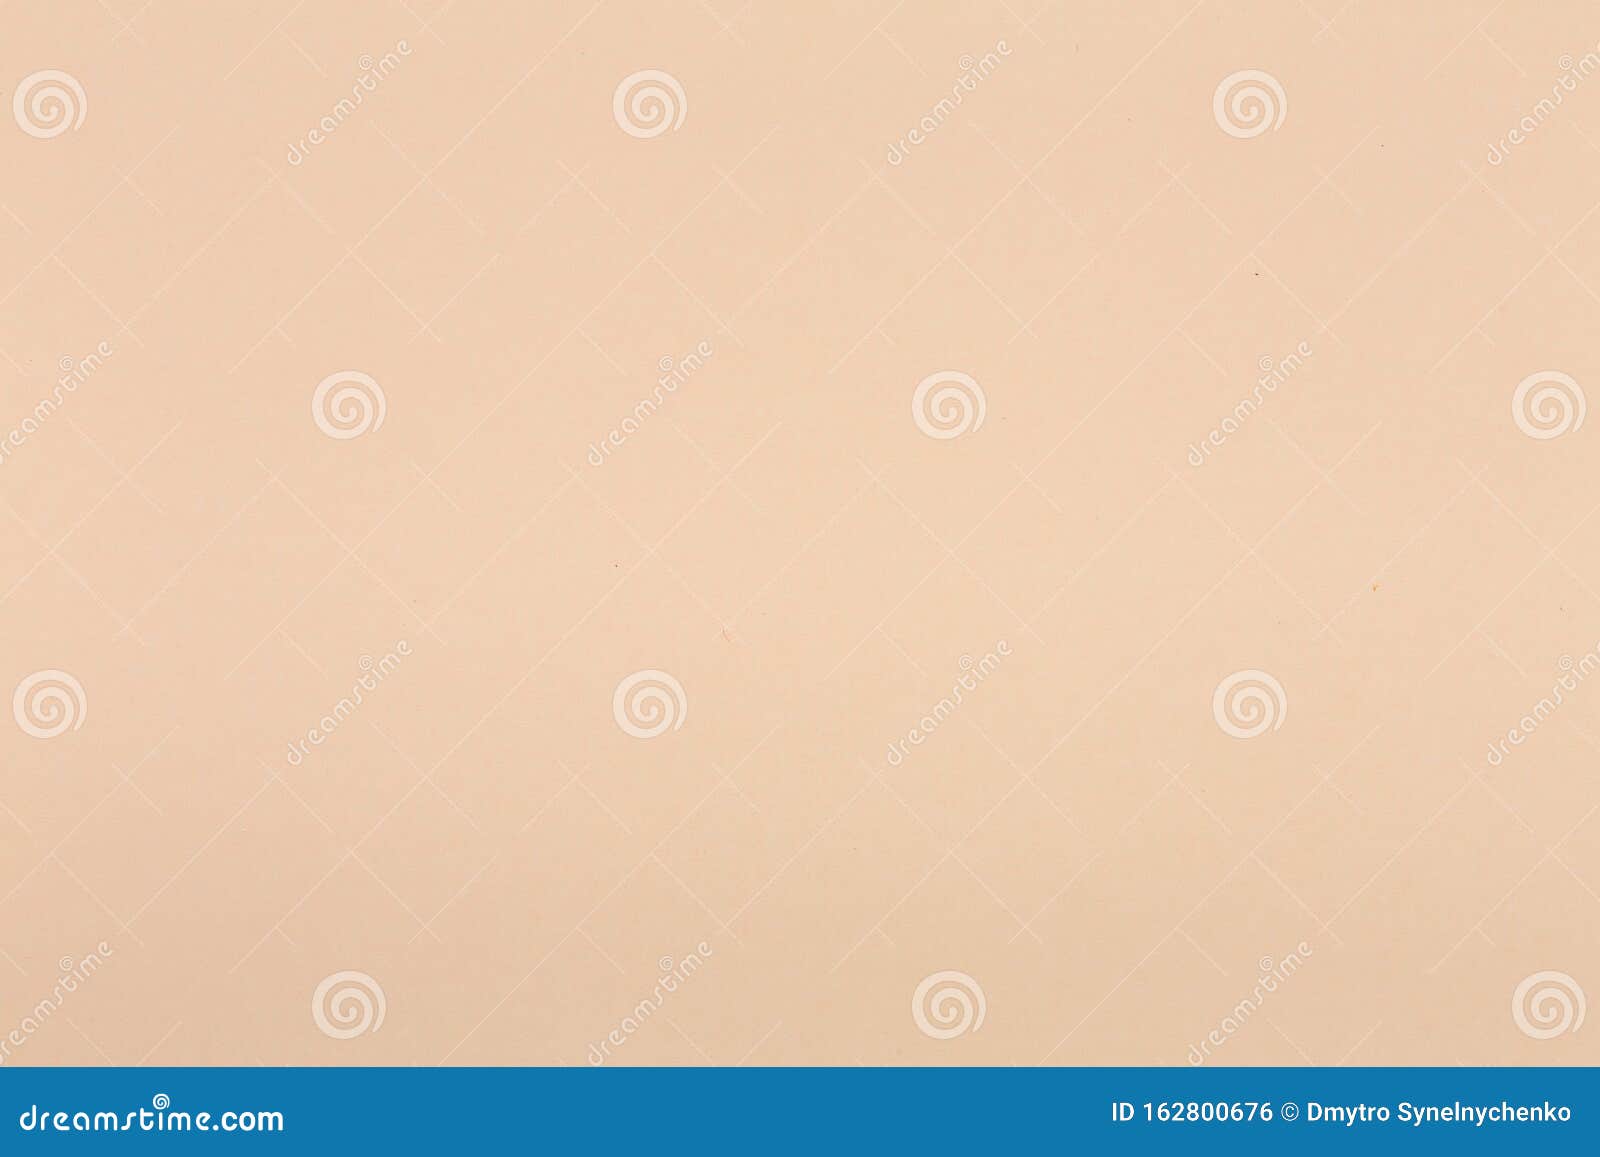 Beige Cream Color. High Quality Paper Texture. Stock Photo - Image